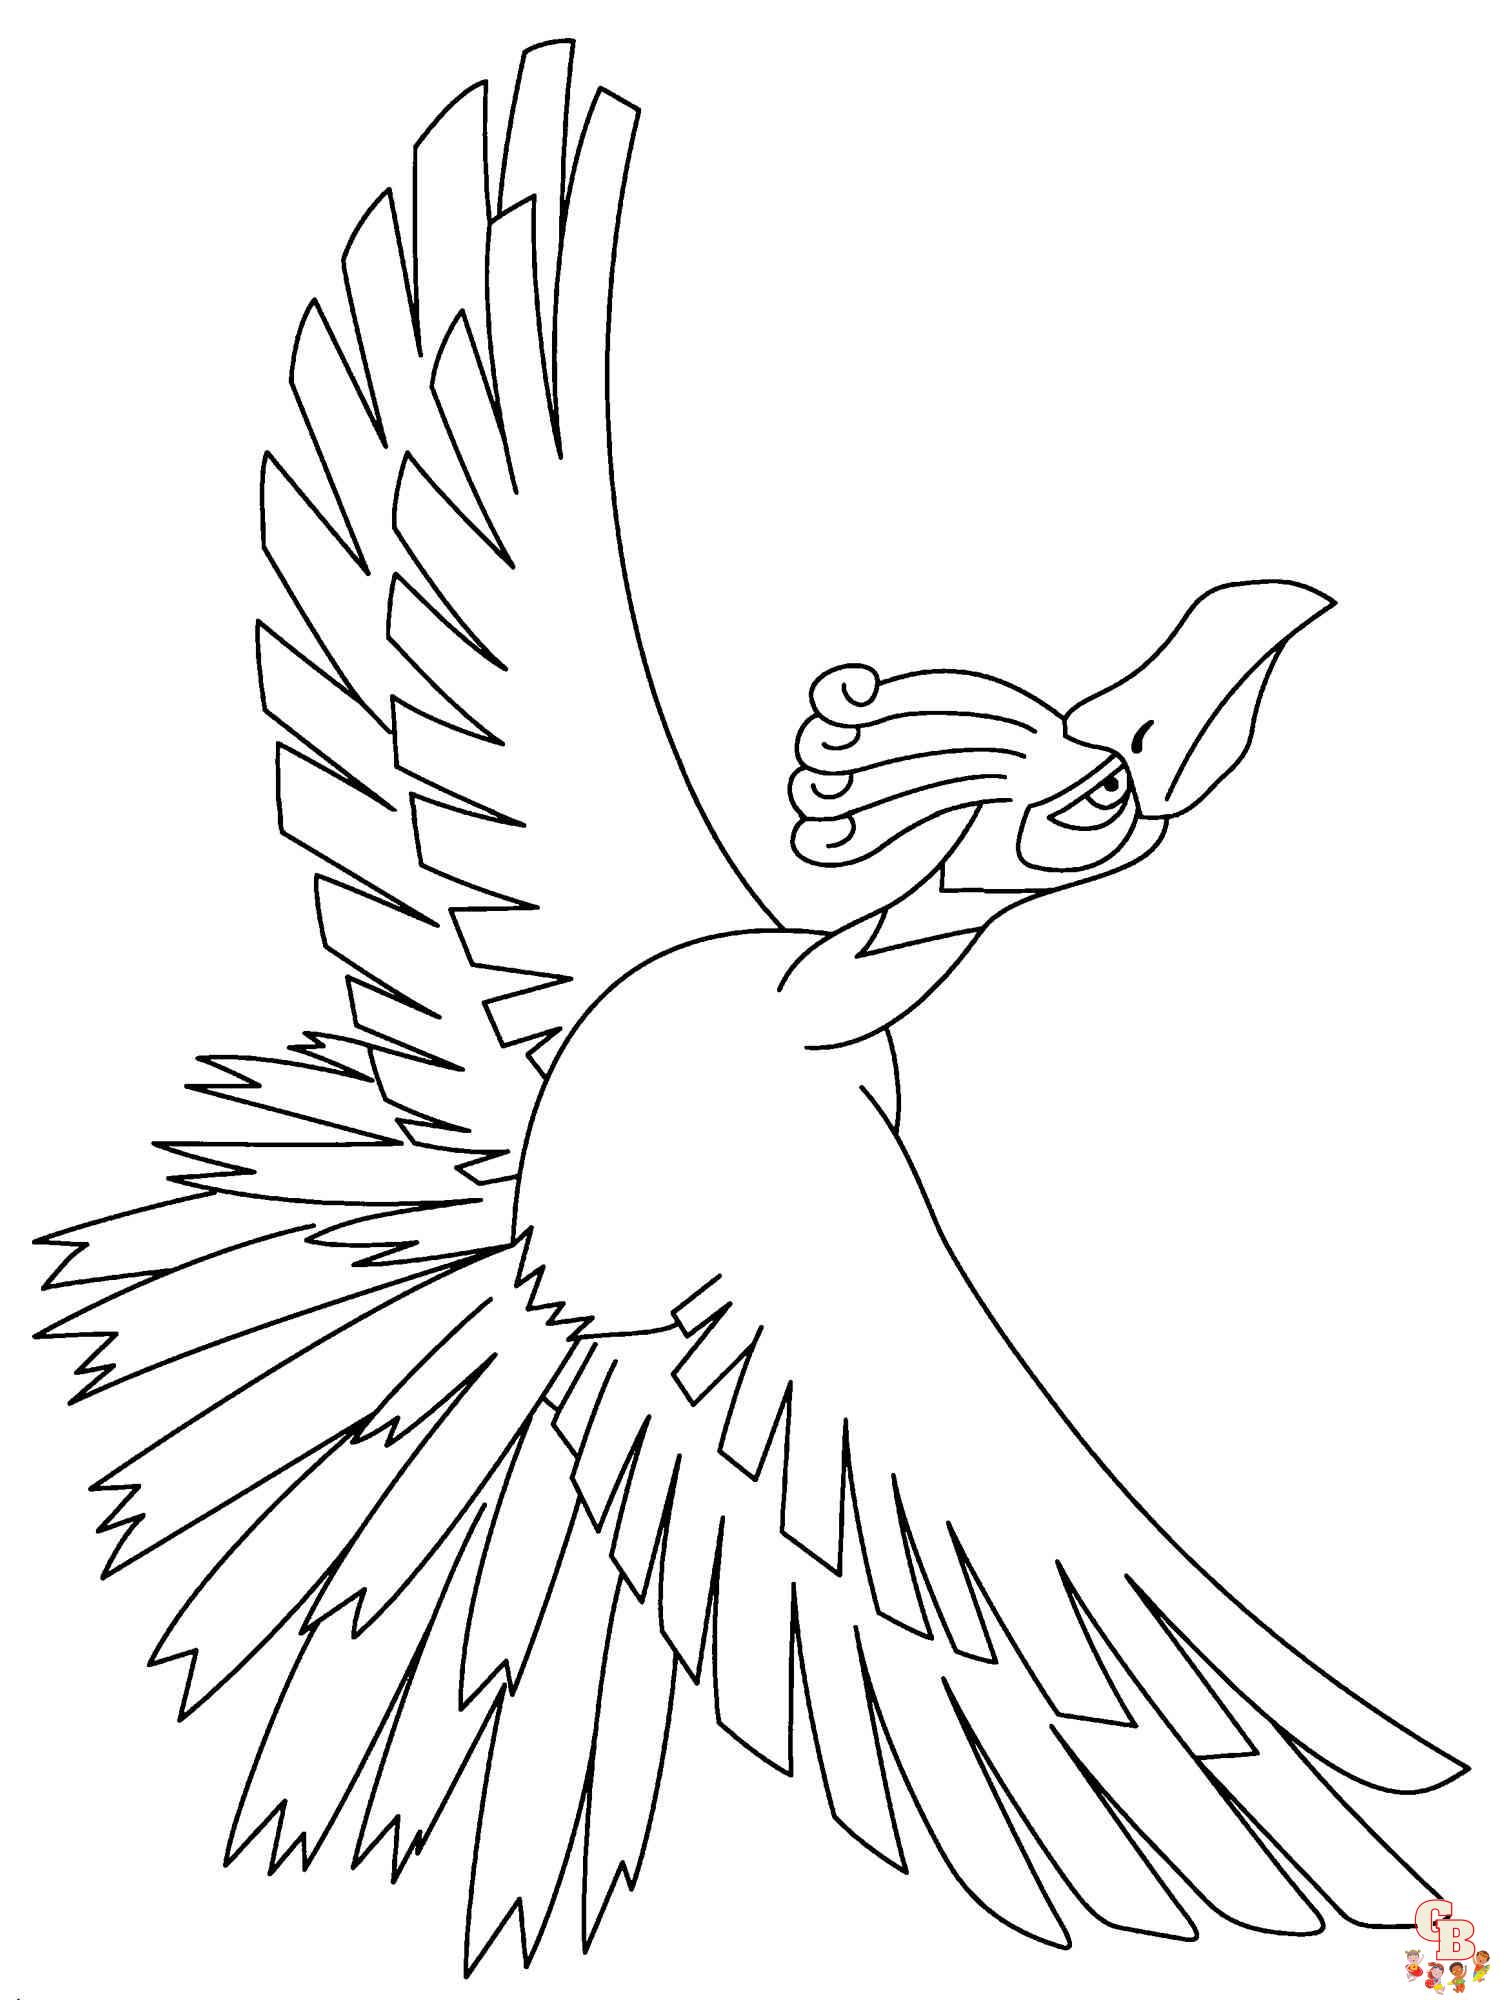 Ho oh Coloring Pages 2